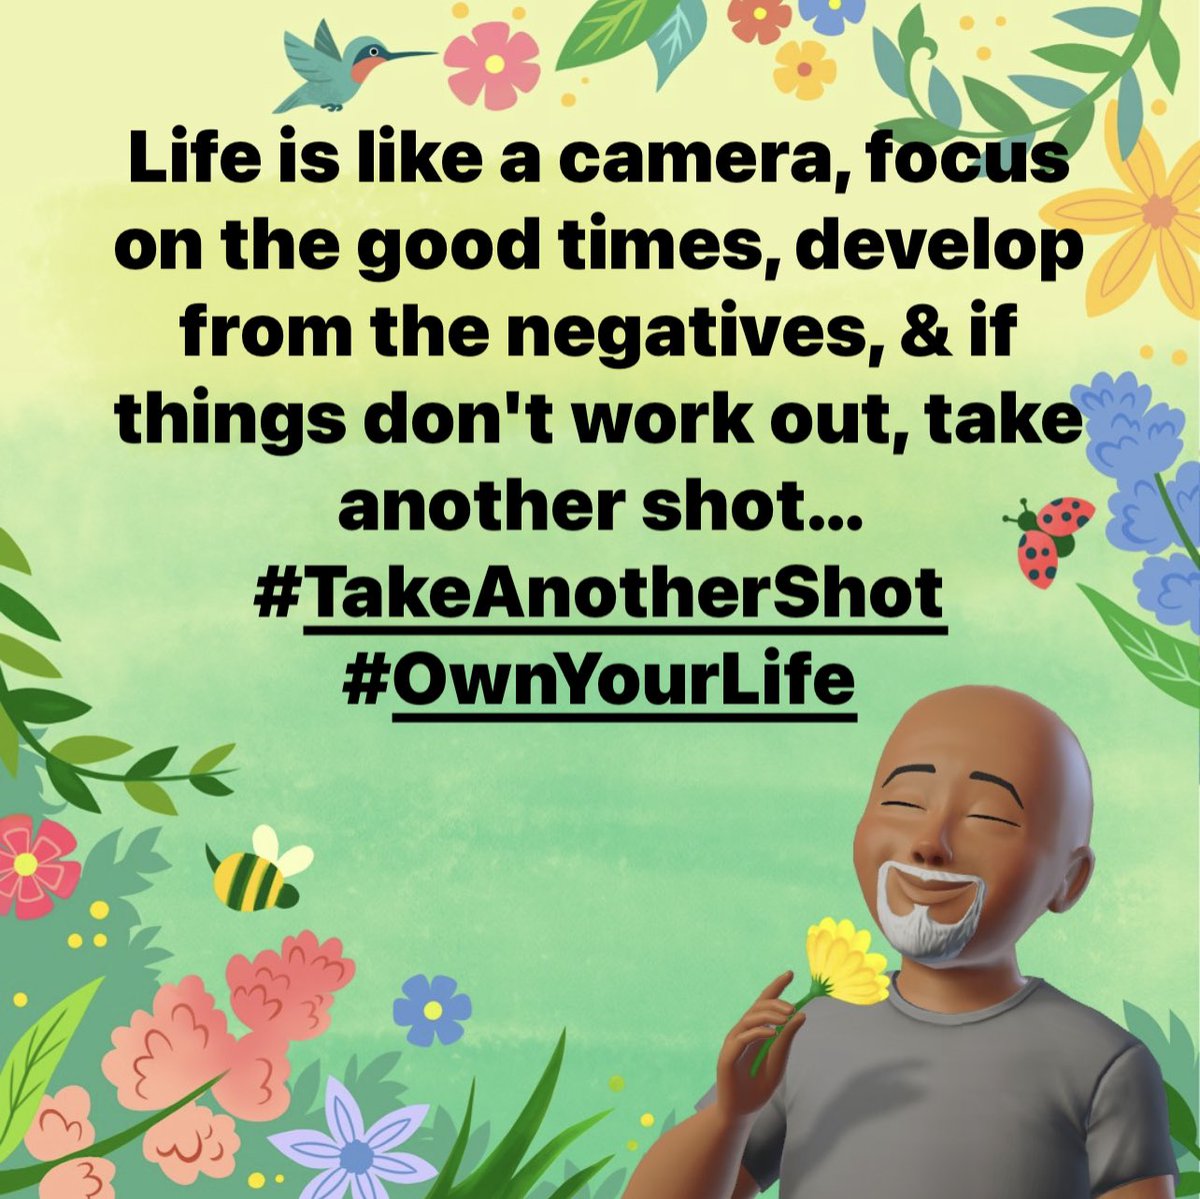 Life is like a camera, focus on the good times, develop from the negatives, & if things don't work out, take another shot… 🌺🌸🌼🌻
🦋🔥💪🏾🌱
#TakeAnotherShot #PositiveSelfTalk #YouOweYou #WorkInProgress #EmbraceTheJourney #OwnYourLife #OYL